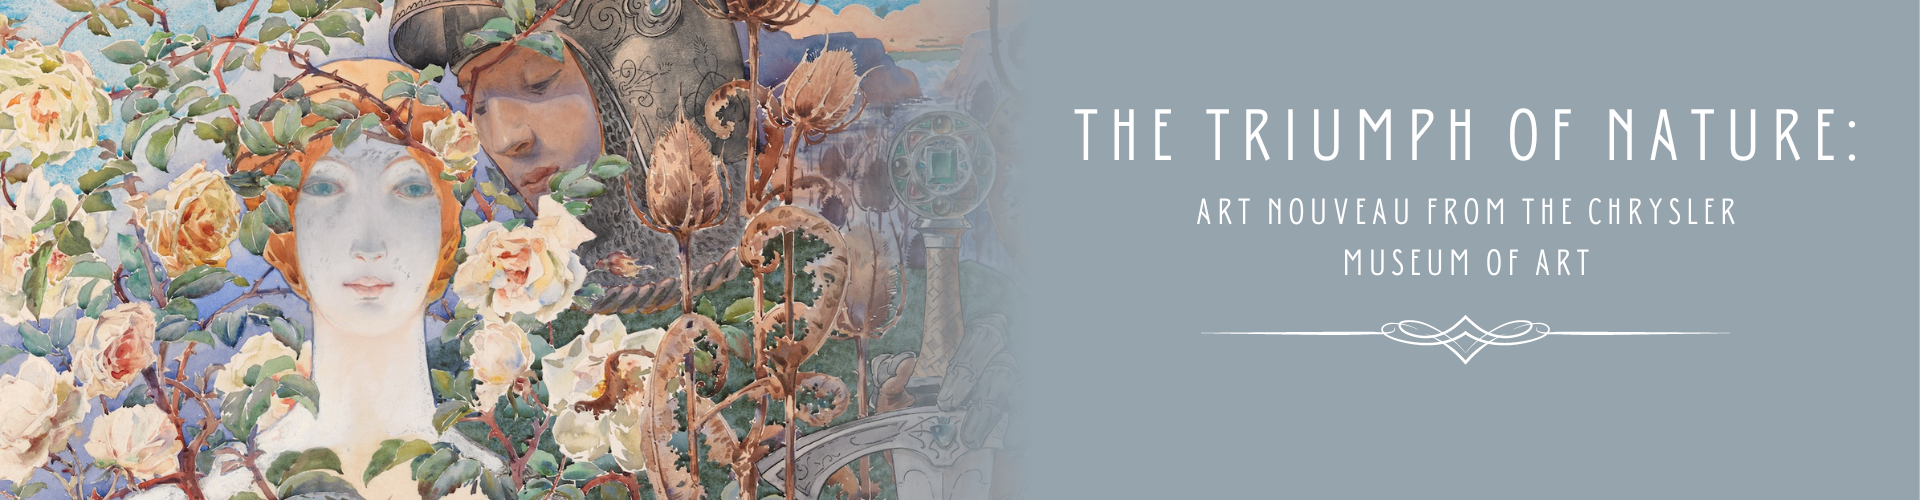 The Triumph of Nature: Art Nouveau from the Chrysler Museum of Art